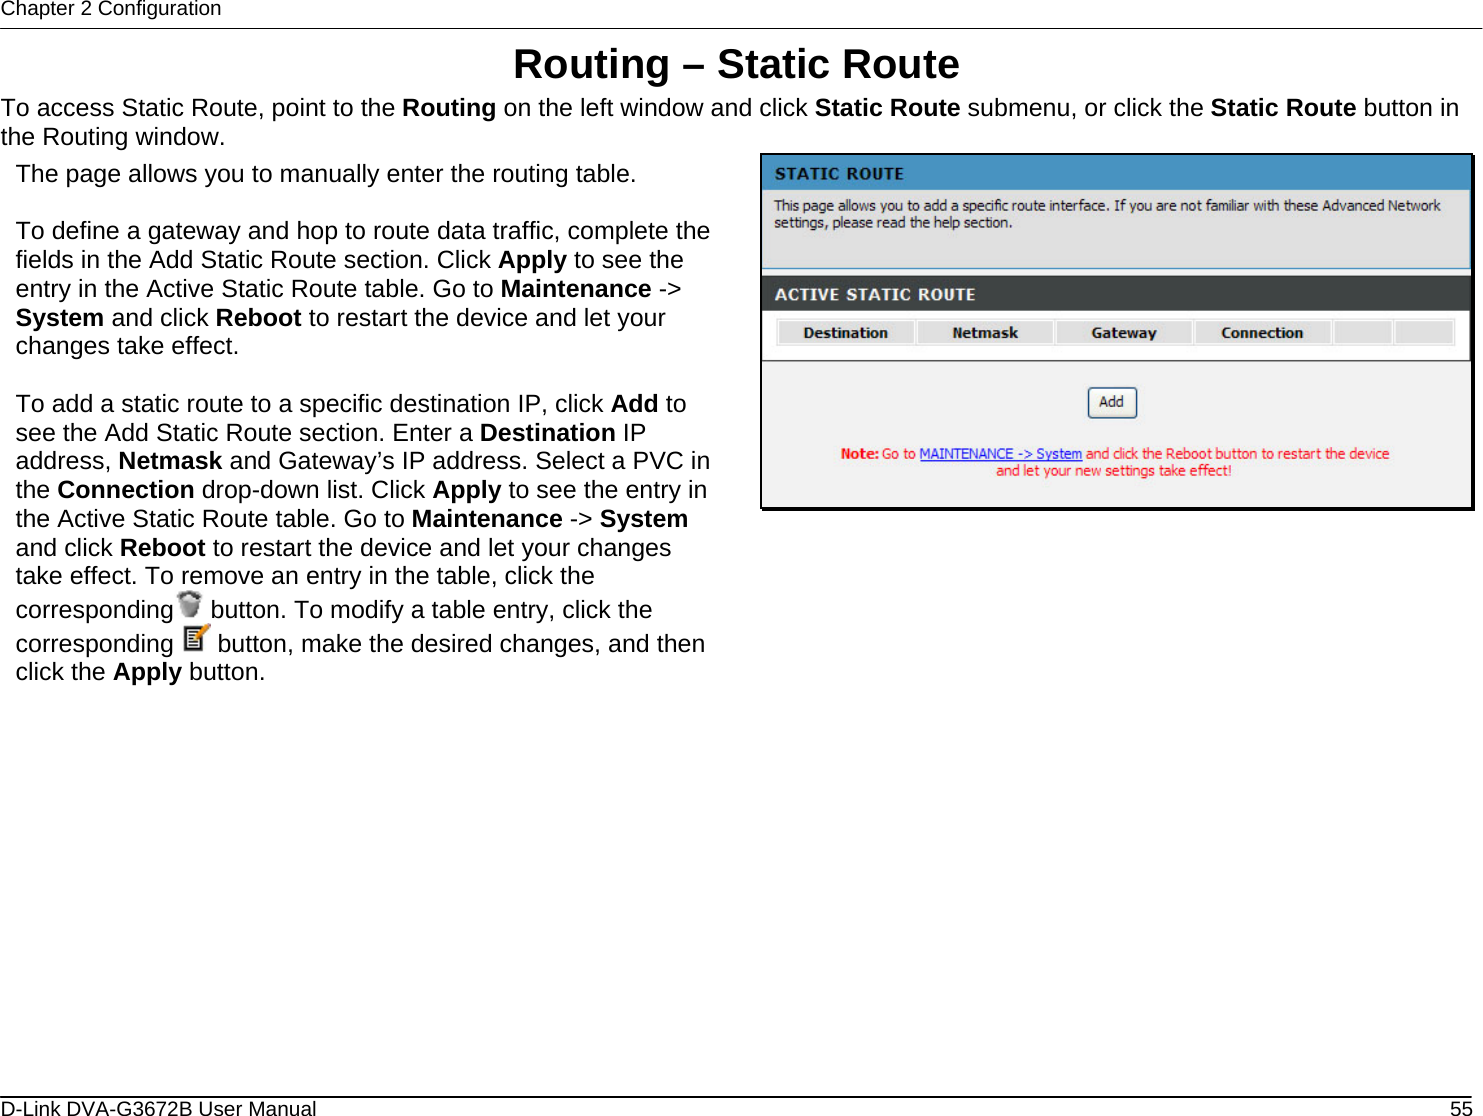 Chapter 2 Configuration Routing – Static Route To access Static Route, point to the Routing on the left window and click Static Route submenu, or click the Static Route button in the Routing window.  The page allows you to manually enter the routing table.  To define a gateway and hop to route data traffic, complete the fields in the Add Static Route section. Click Apply to see the entry in the Active Static Route table. Go to Maintenance -&gt; System and click Reboot to restart the device and let your changes take effect.  To add a static route to a specific destination IP, click Add to see the Add Static Route section. Enter a Destination IP address, Netmask and Gateway’s IP address. Select a PVC in the Connection drop-down list. Click Apply to see the entry in the Active Static Route table. Go to Maintenance -&gt; System and click Reboot to restart the device and let your changes take effect. To remove an entry in the table, click the corresponding  button. To modify a table entry, click the corresponding   button, make the desired changes, and then click the Apply button.                     D-Link DVA-G3672B User Manual  55